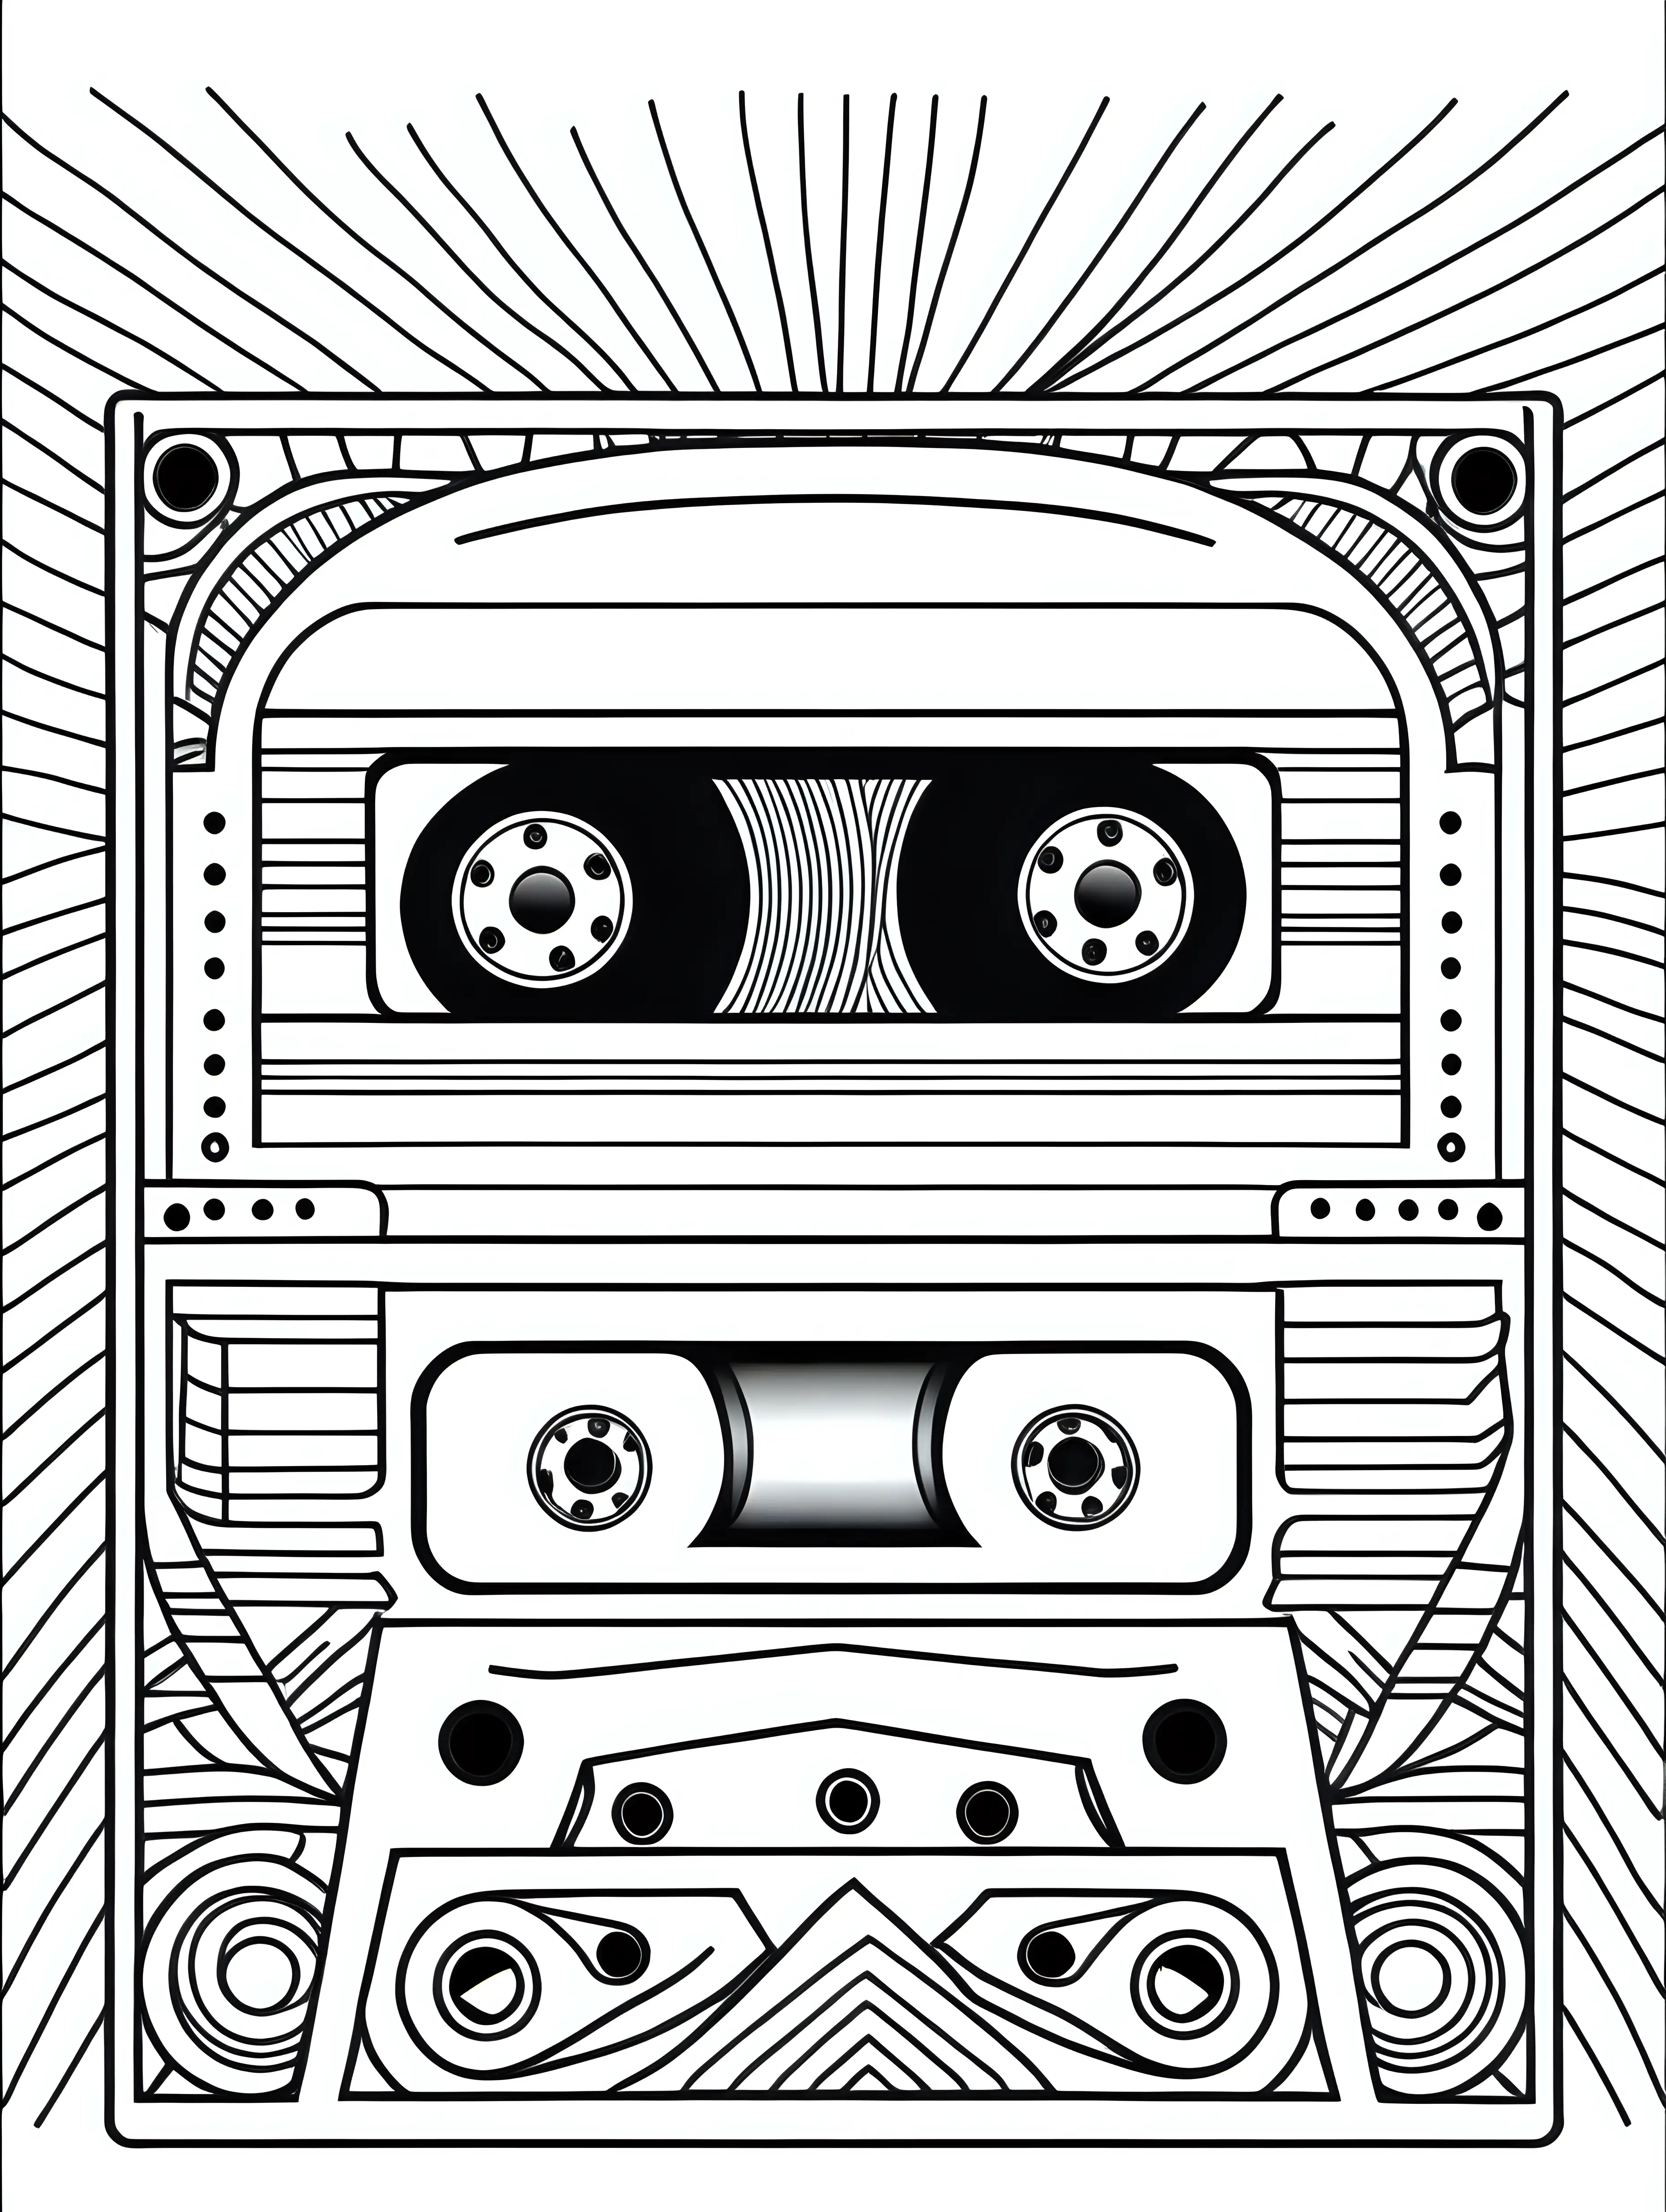 Relaxing Adult Coloring Page Nostalgic Mix Tape Doodle